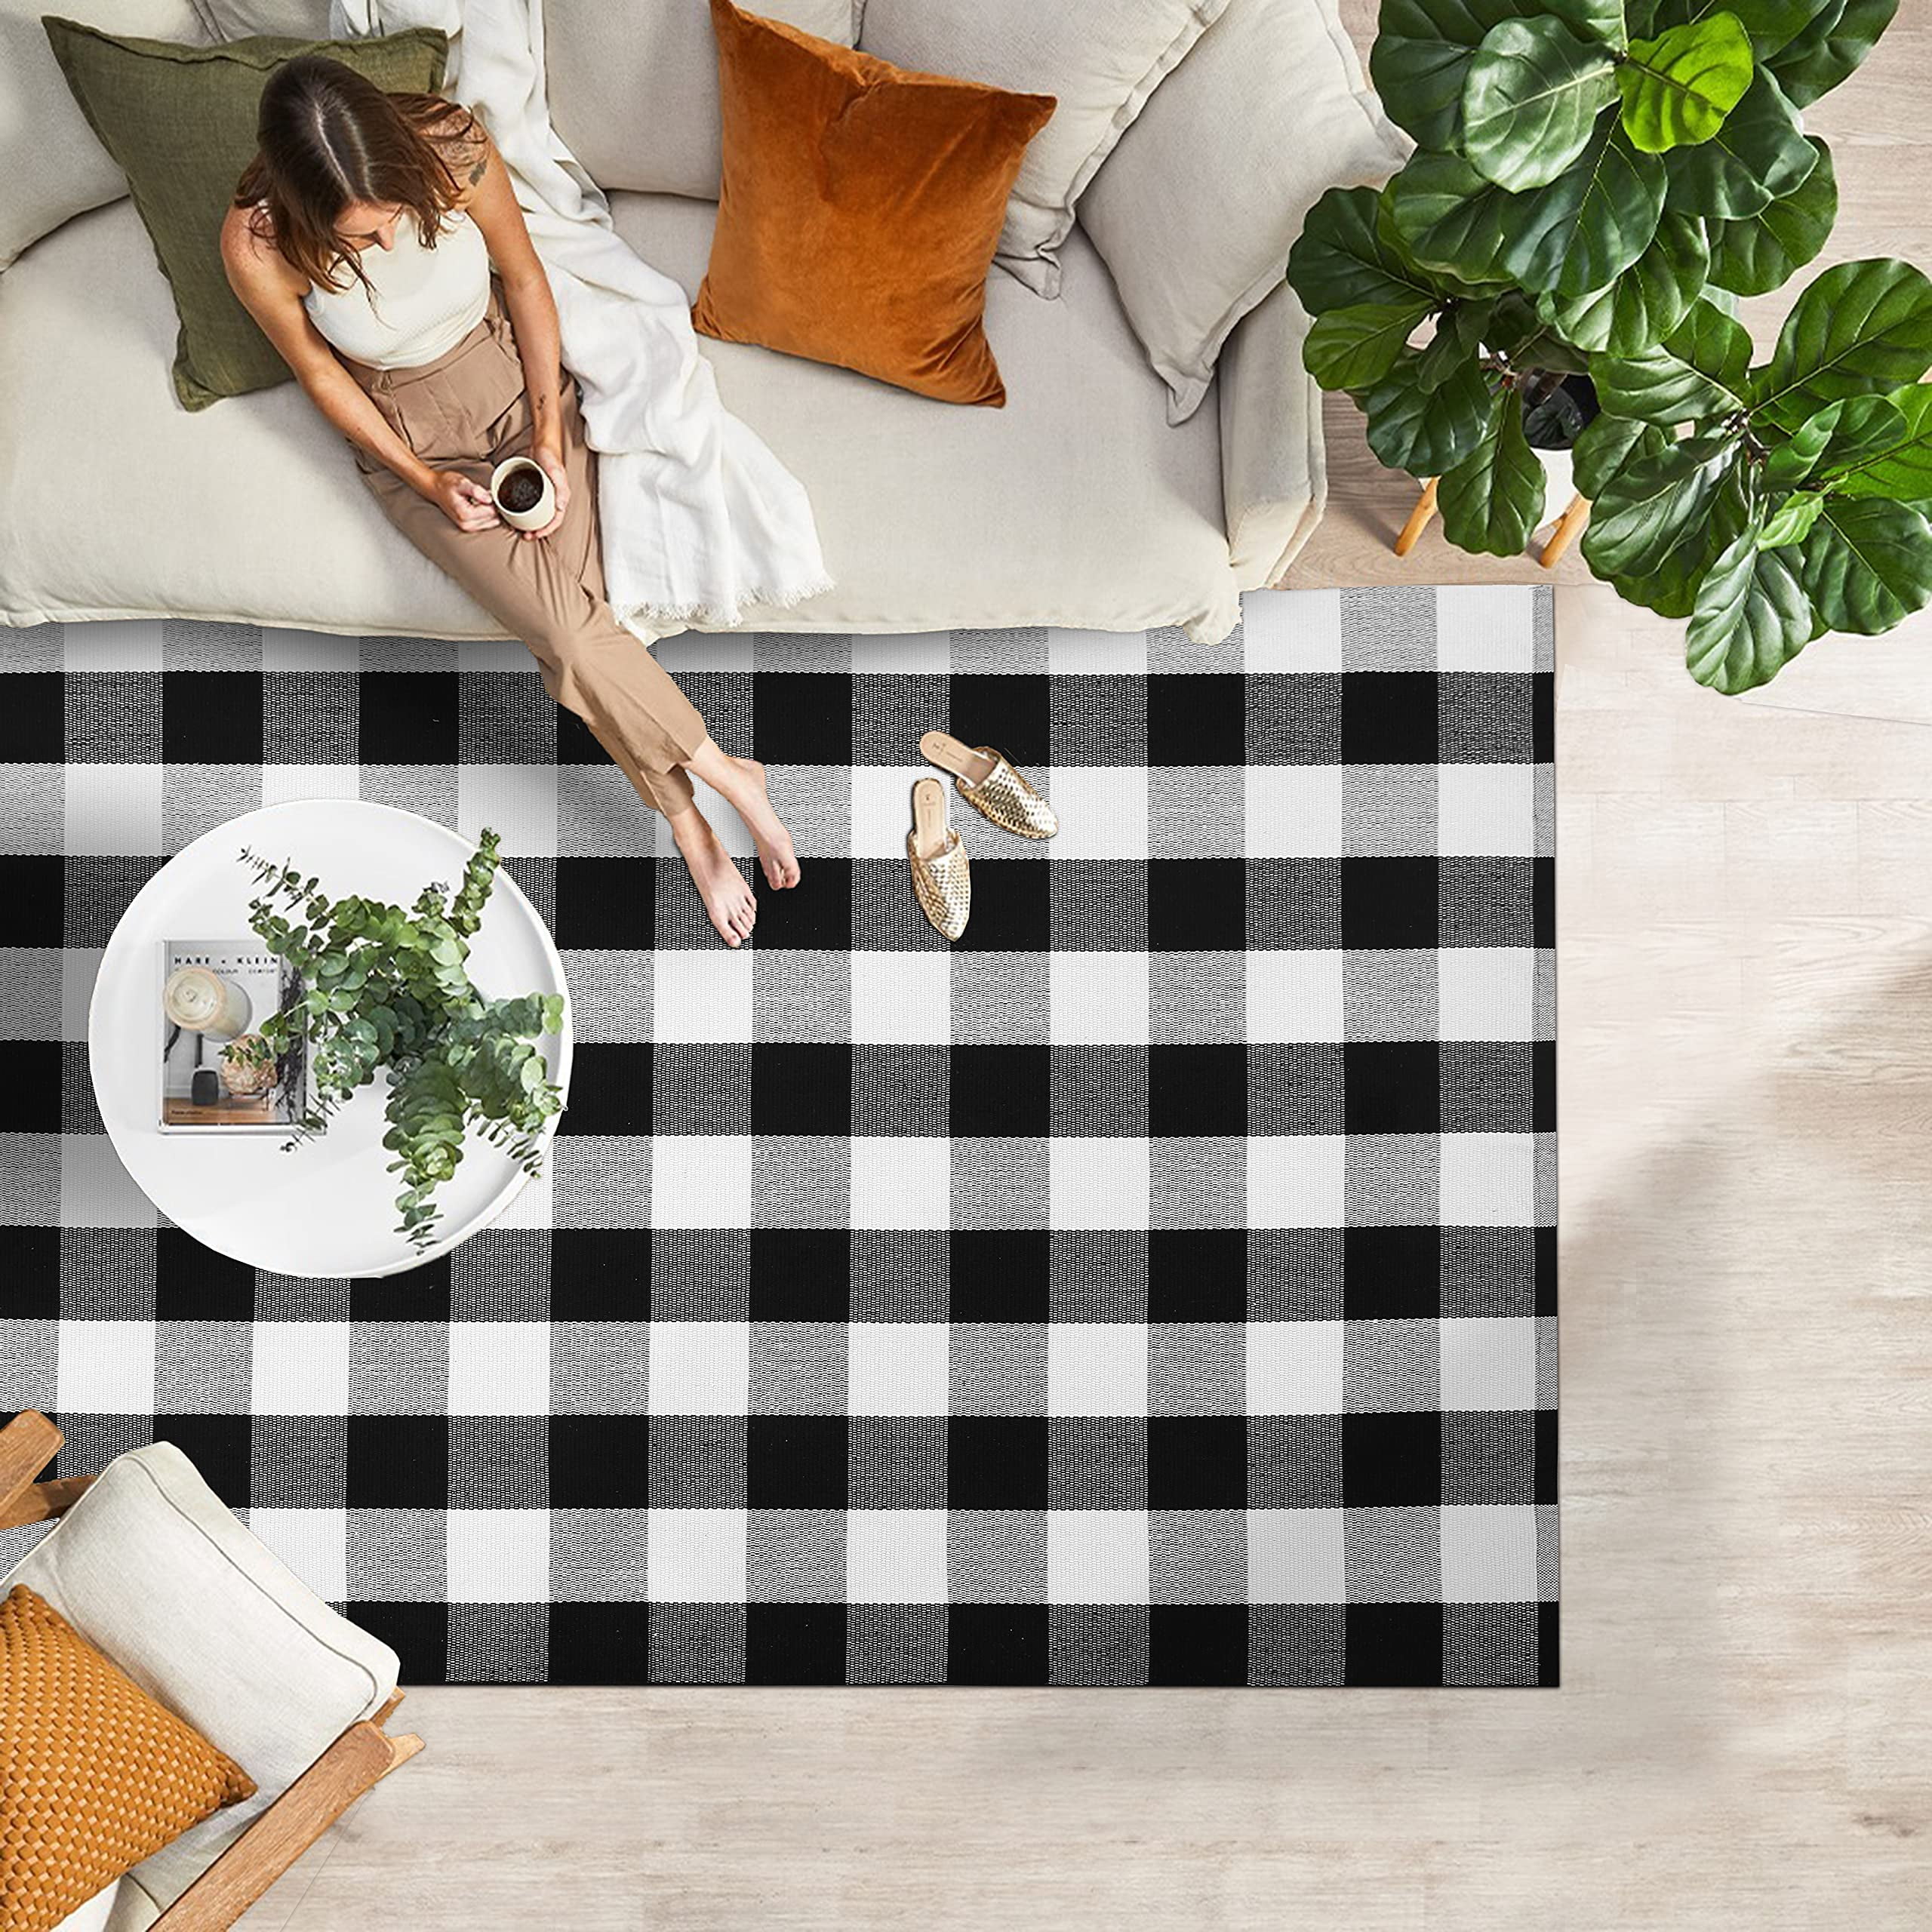 Honeybloom Buffalo Check Plaid Welcome Coir Mat, 18x30, Black Sold by at Home